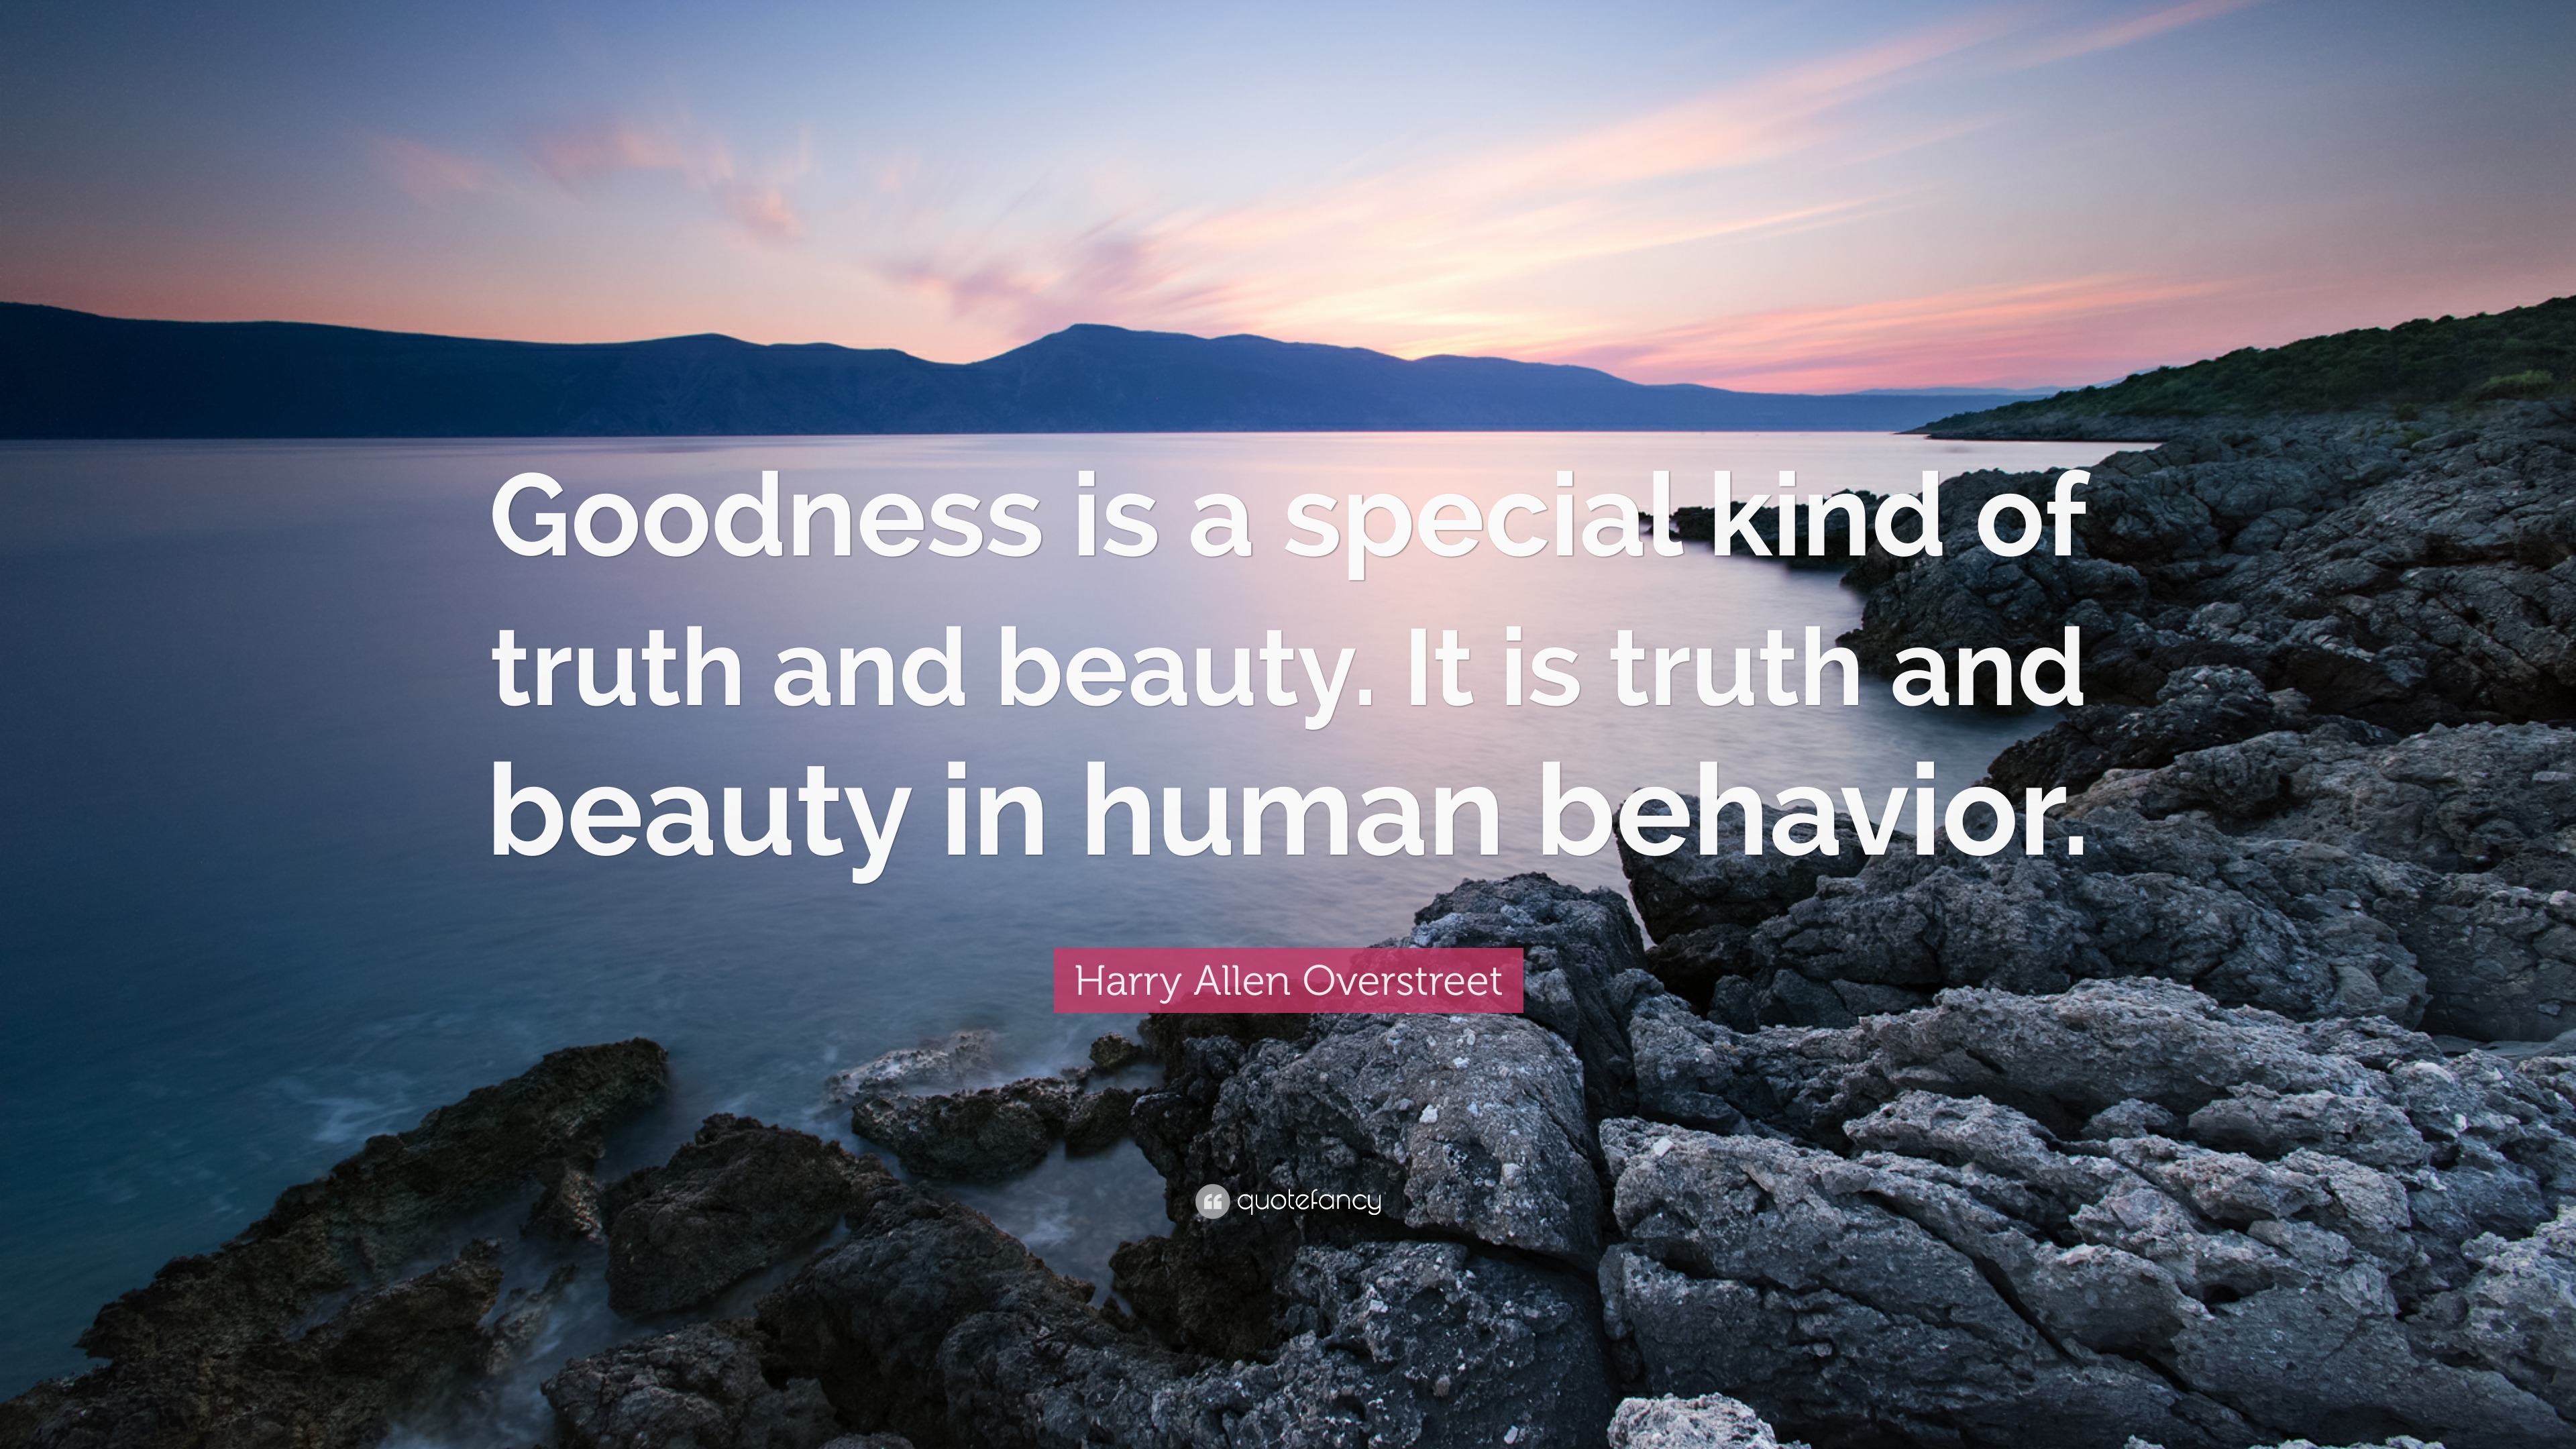 Harry Allen Overstreet Quote: “Goodness is a special kind of truth